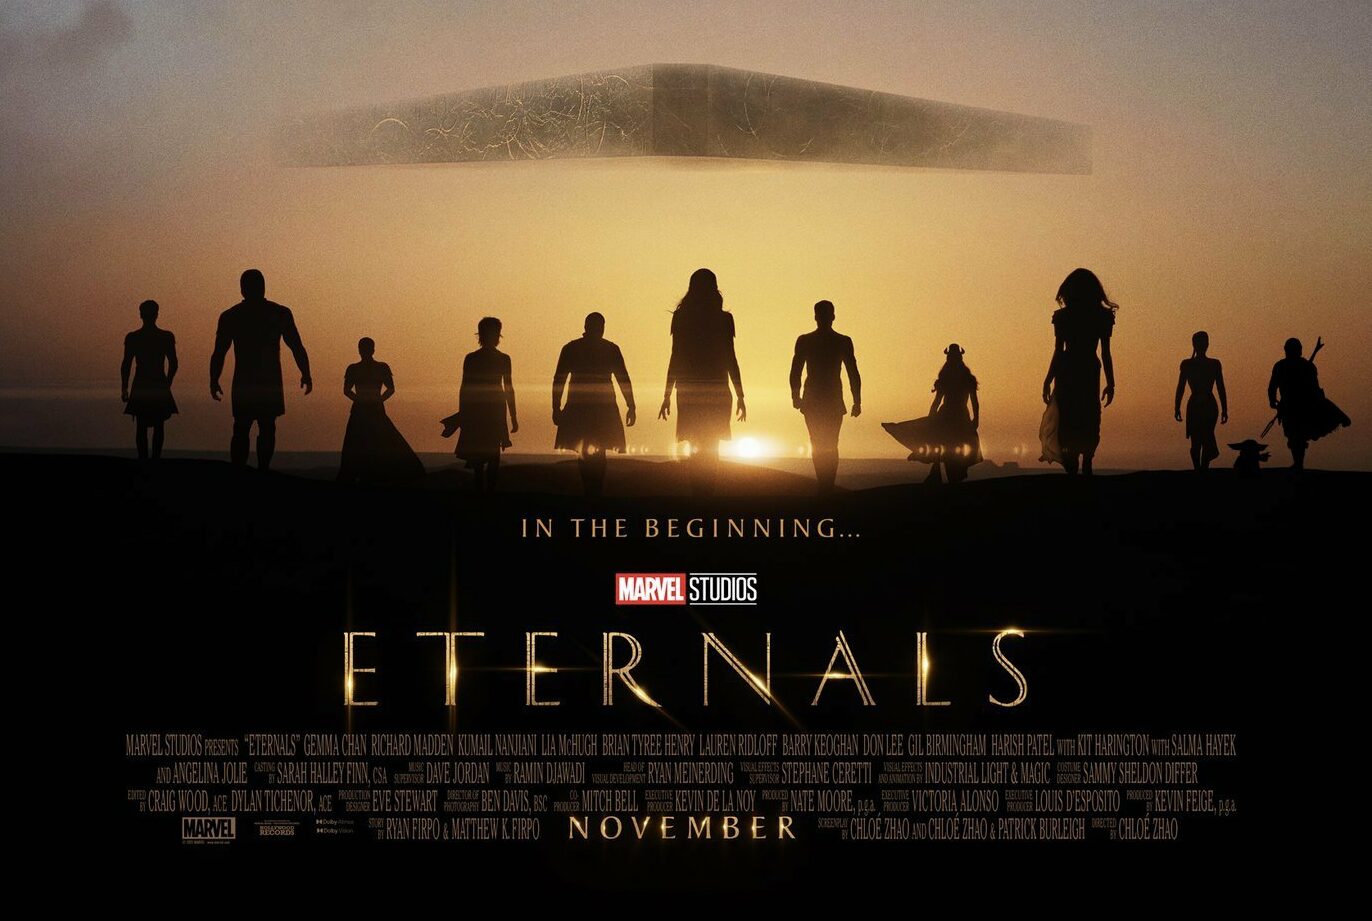 Marvel debuts Eternals trailer, see what we learned